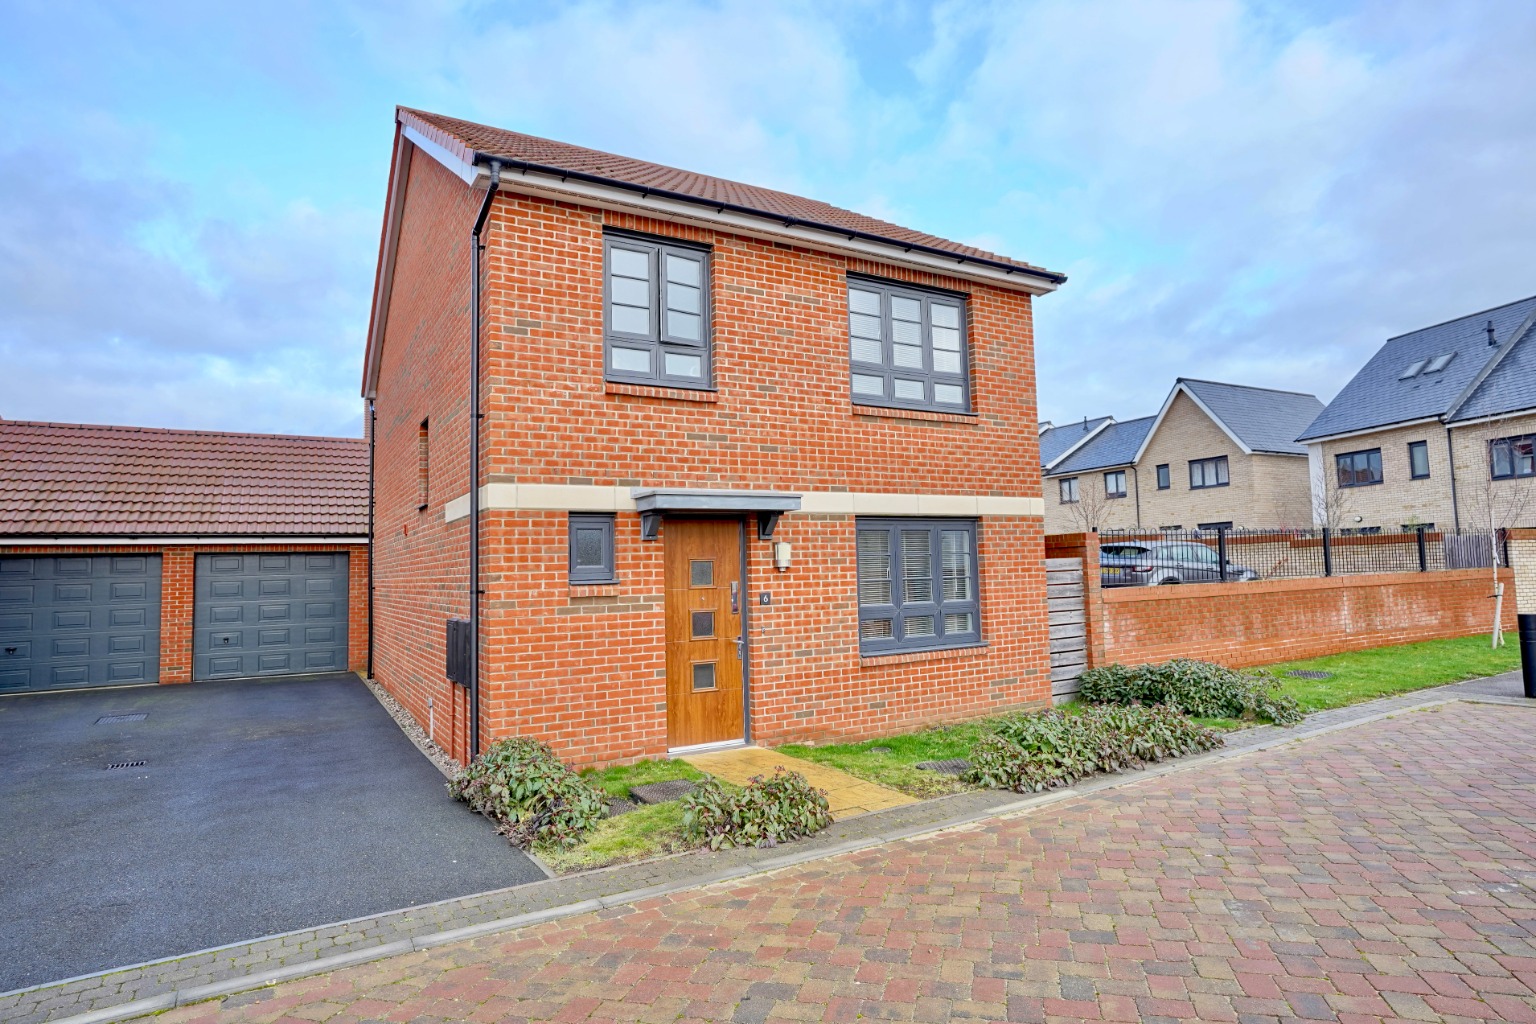 The interior comprises an entrance hall, a ground floor cloakroom, and a beautiful open-plan interior. There's a modern fitted kitchen with an island and dining area, being open plan to the lounge with French doors out to the garden - making the space very bright and airy.  Upstairs, you will find..